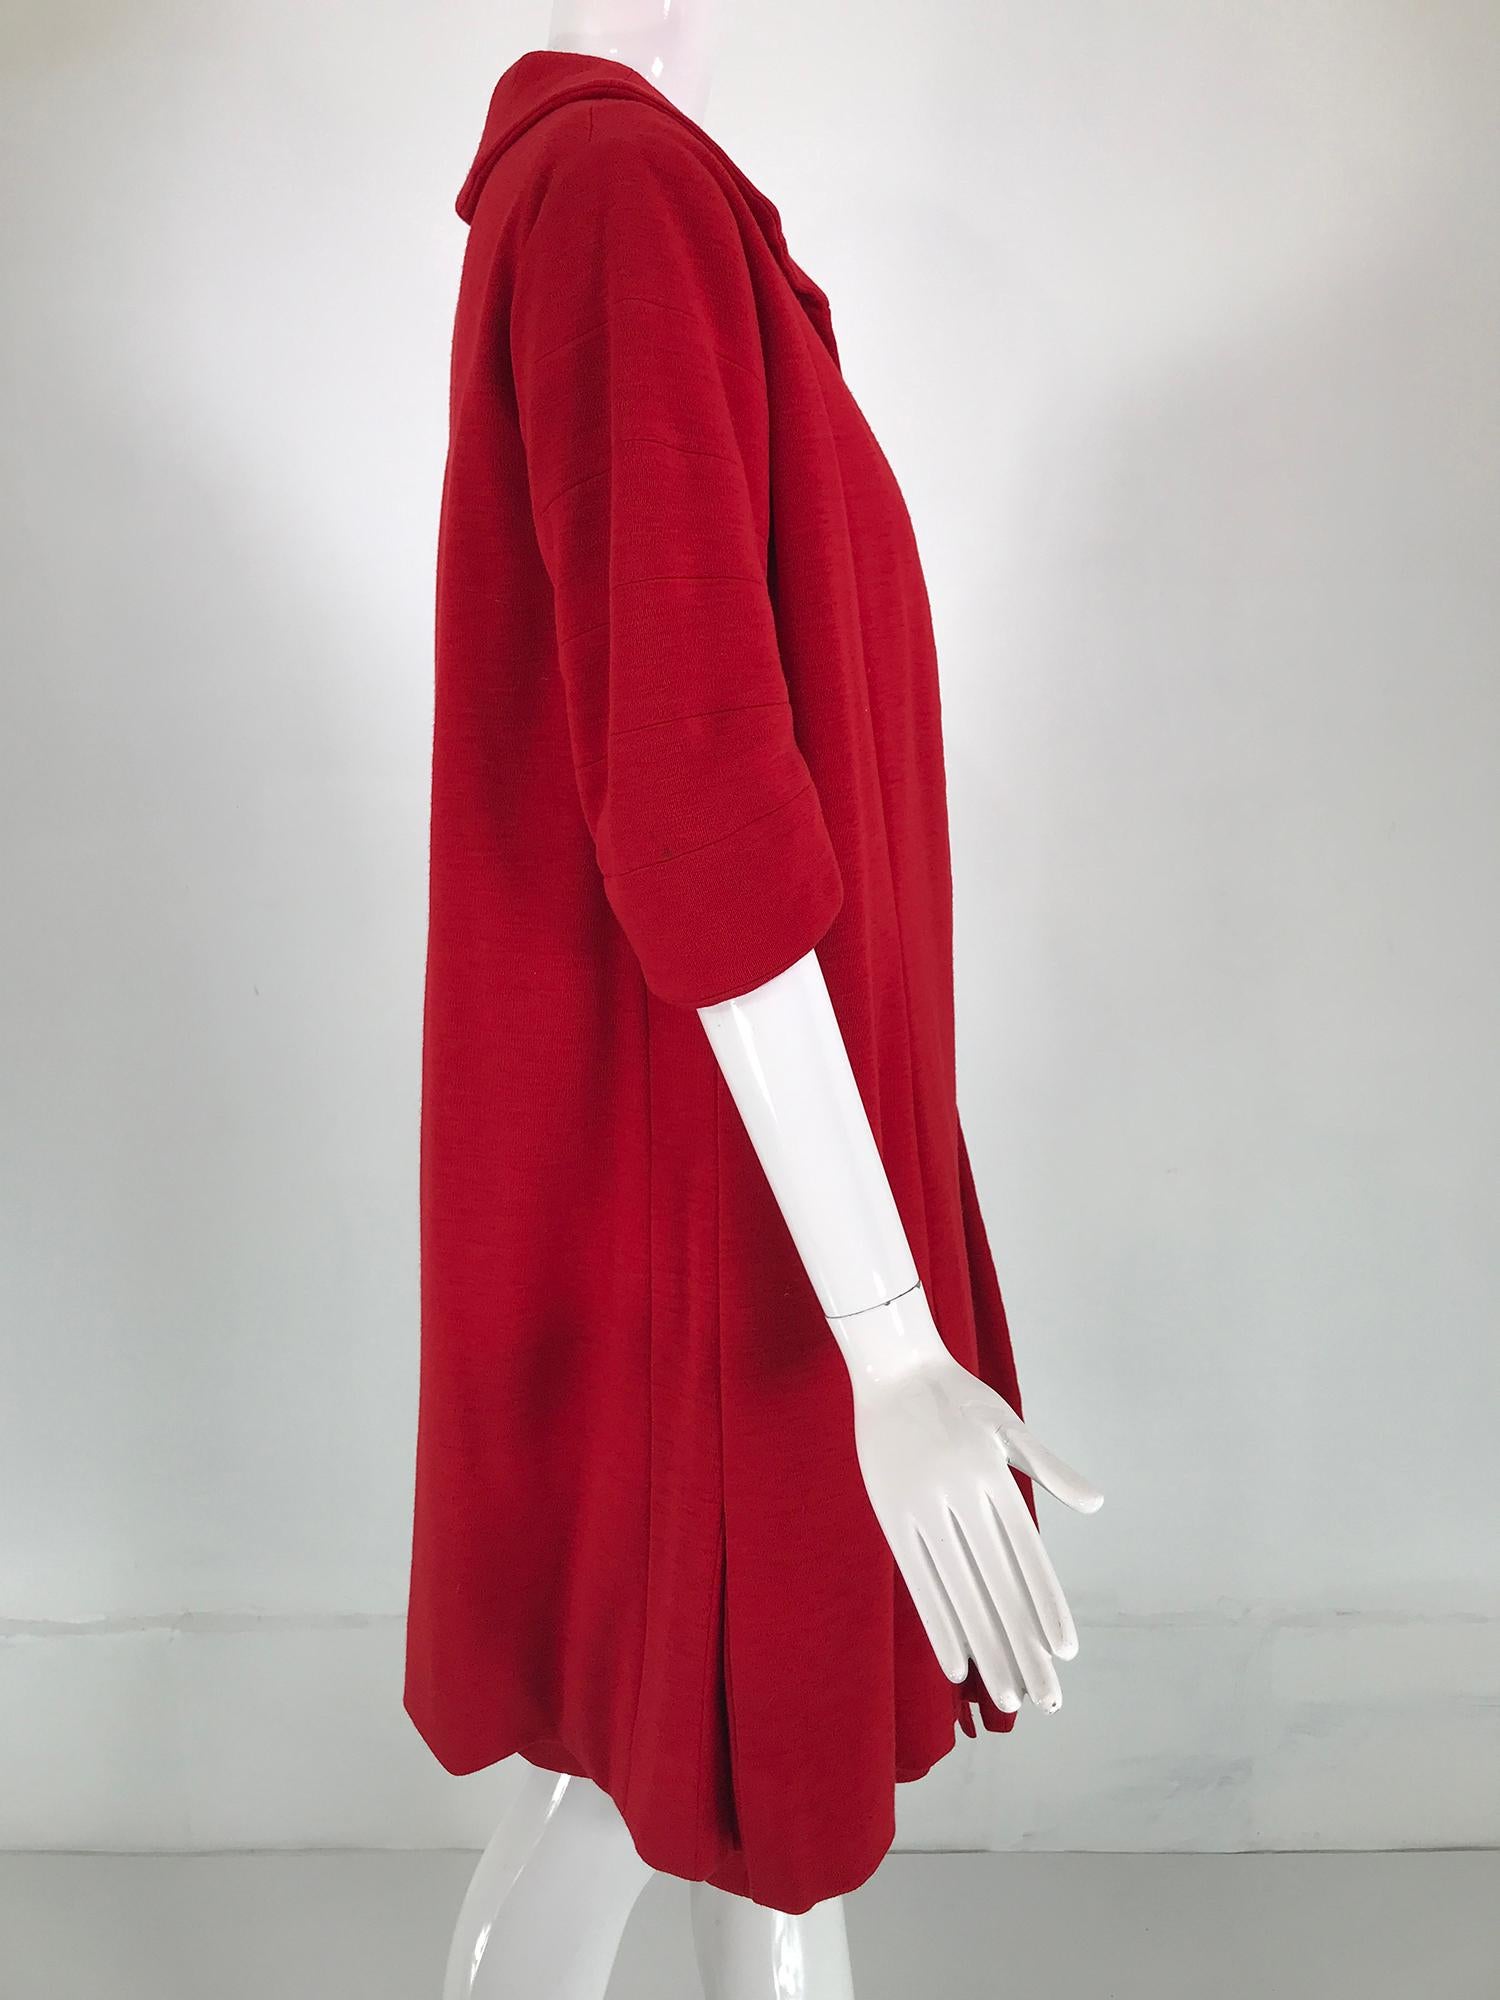 Women's Coco Chanel Red Haute Couture 1950s 2 pc Wool Jersey Jewel Button Dress & Coat  For Sale